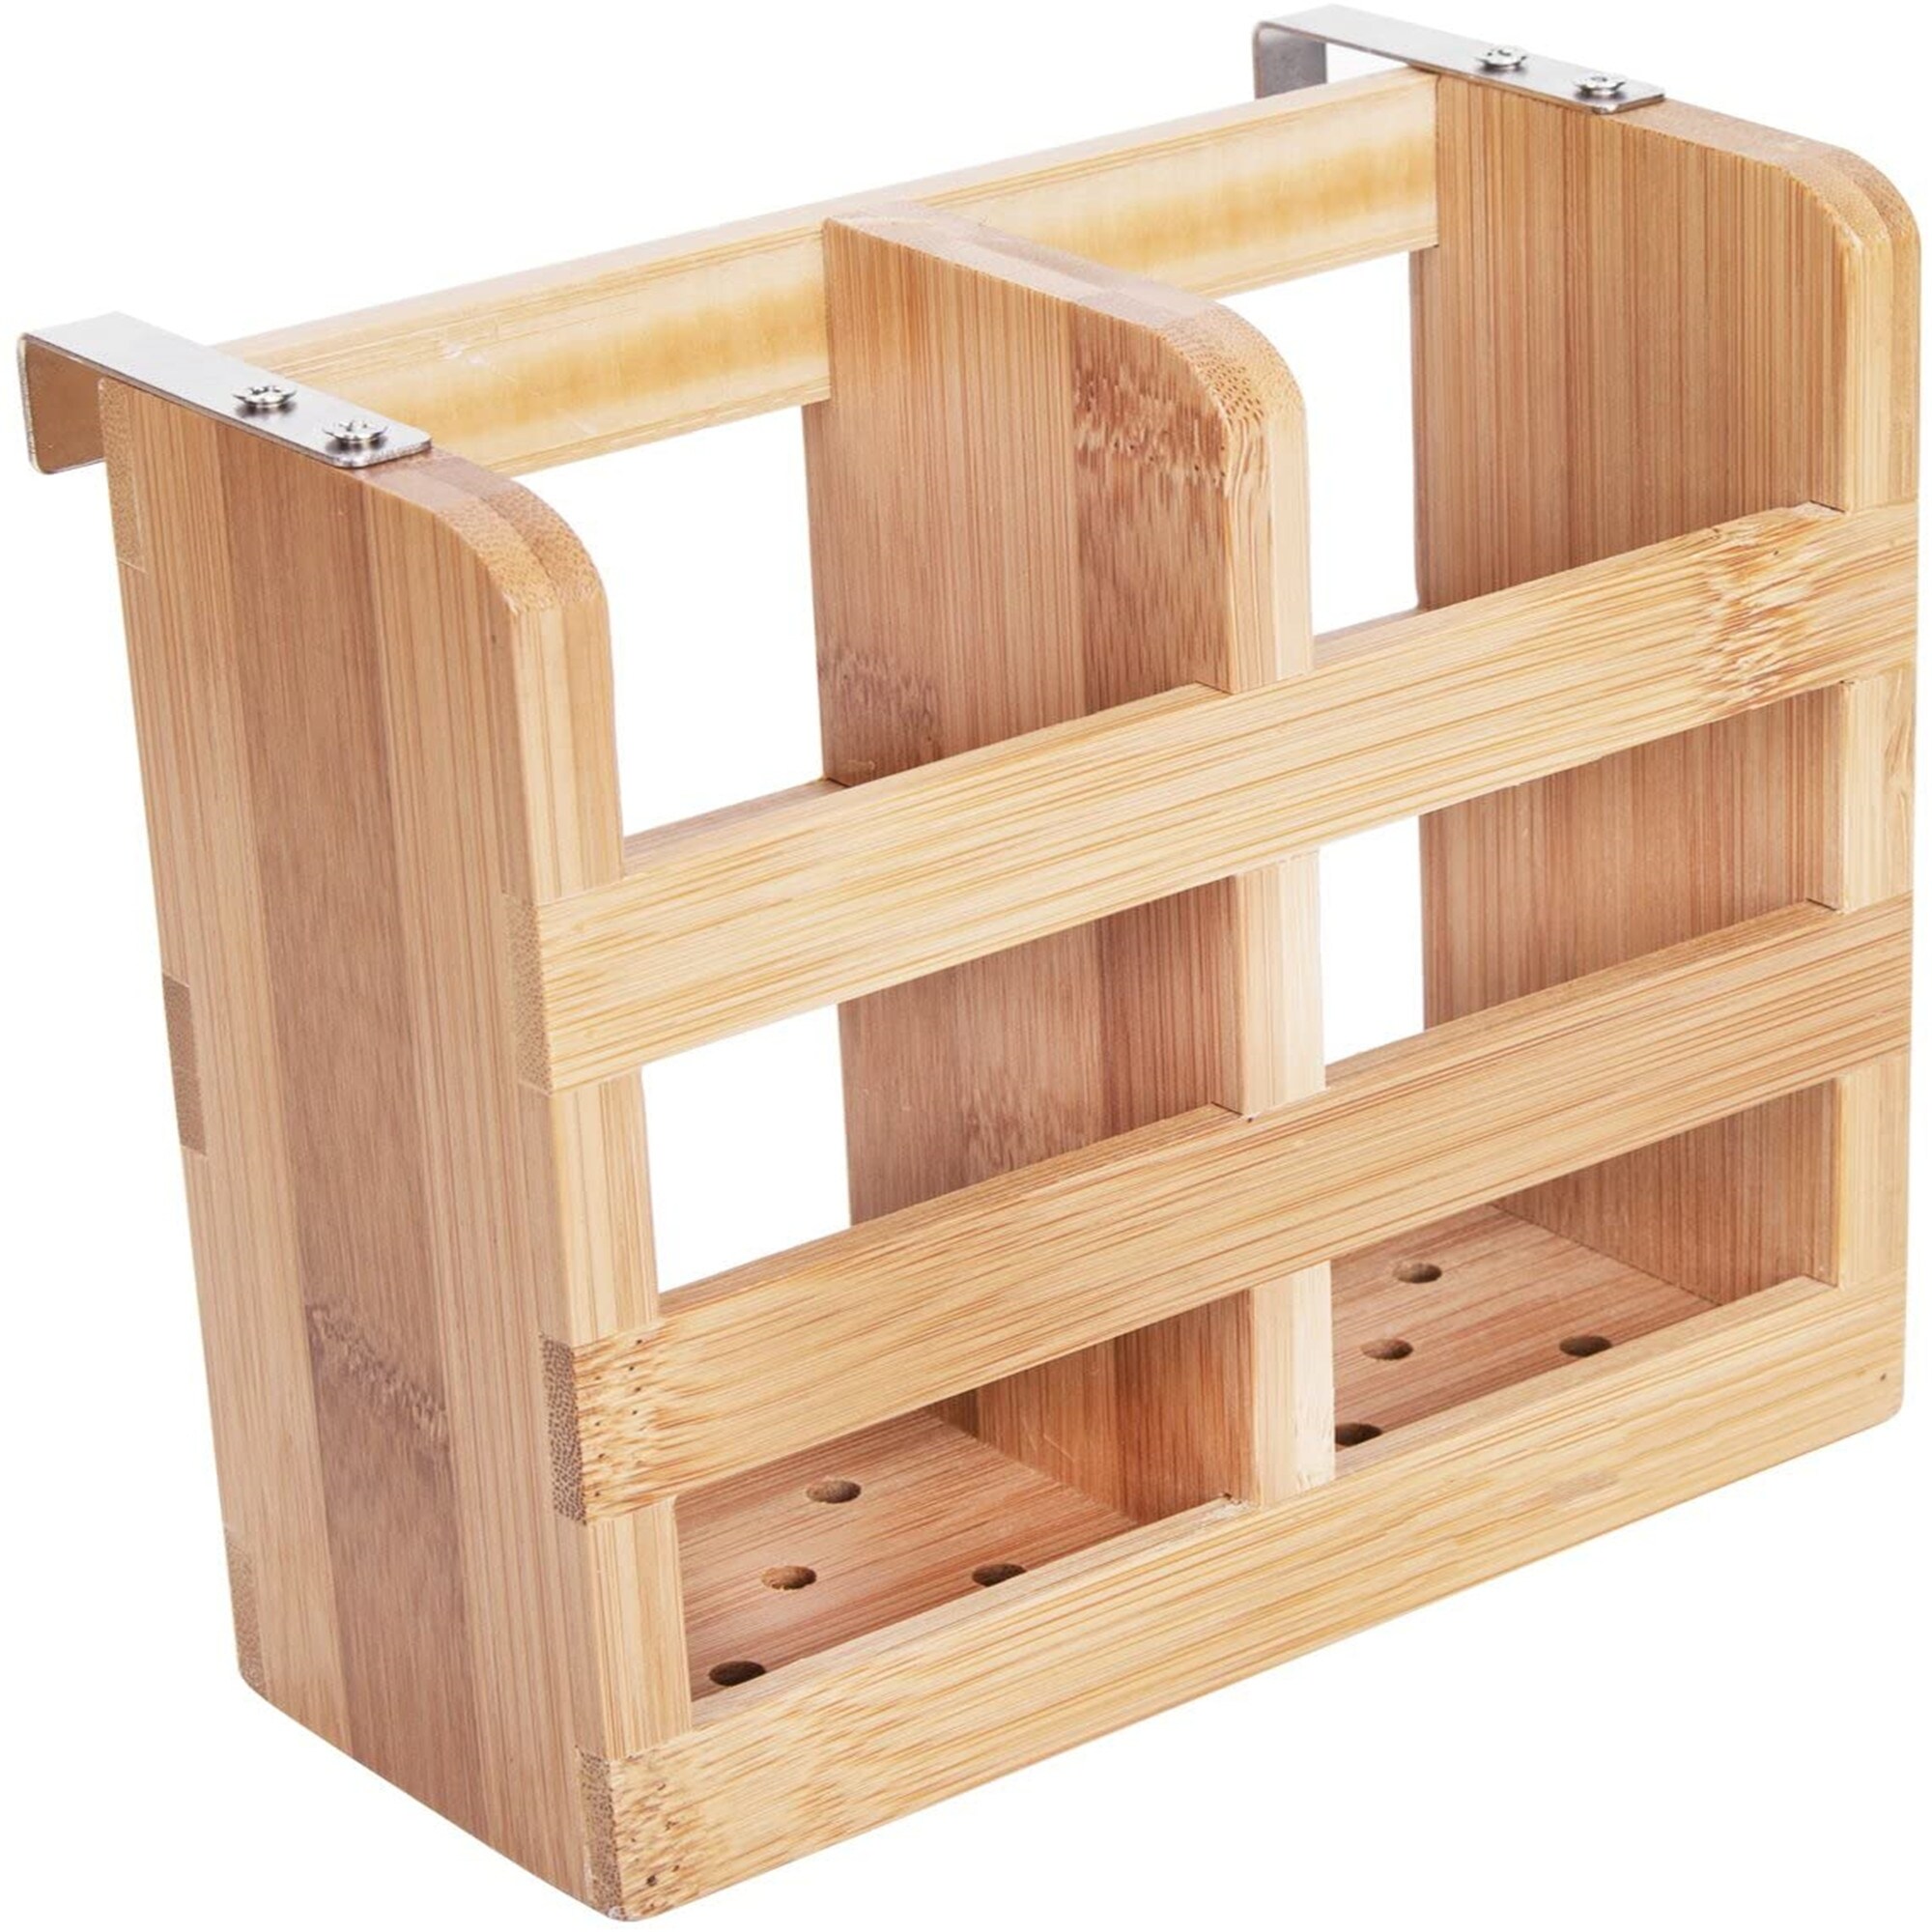 https://ak1.ostkcdn.com/images/products/is/images/direct/ce9a65c98d73b4efe9b94b7a00e14690ed2c0e1a/Dish-Rack%2C-Bamboo-Folding-2-Tier-Collapsible-Drainer-Dish-Drying-Rack-%281%2C-Dish-Rack-With-Utensil-Holder%29.jpg